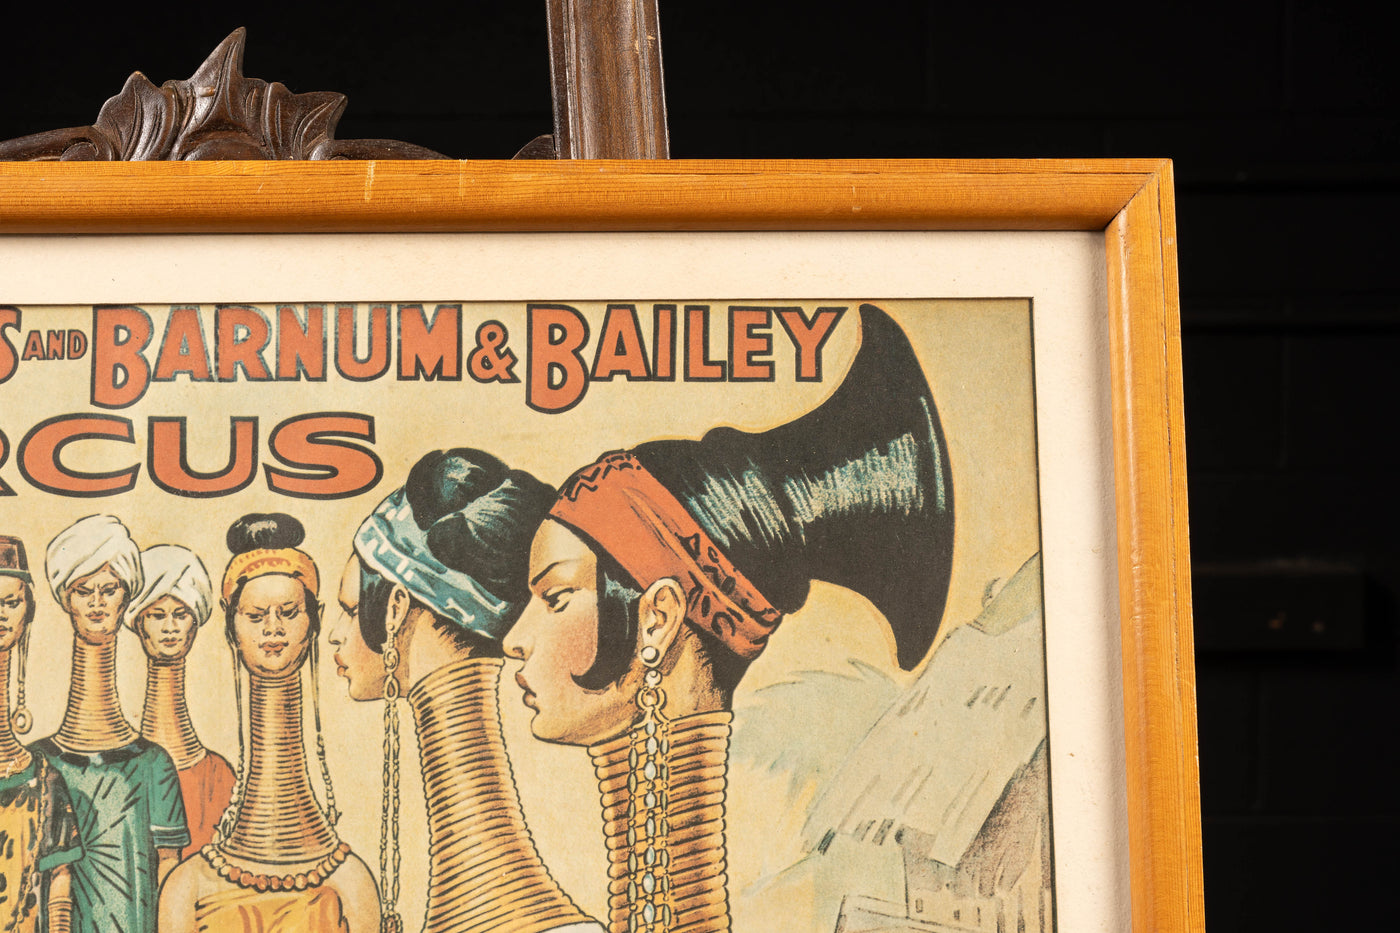 Ringling Bros. and Barnum & Bailey Lithograph Poster